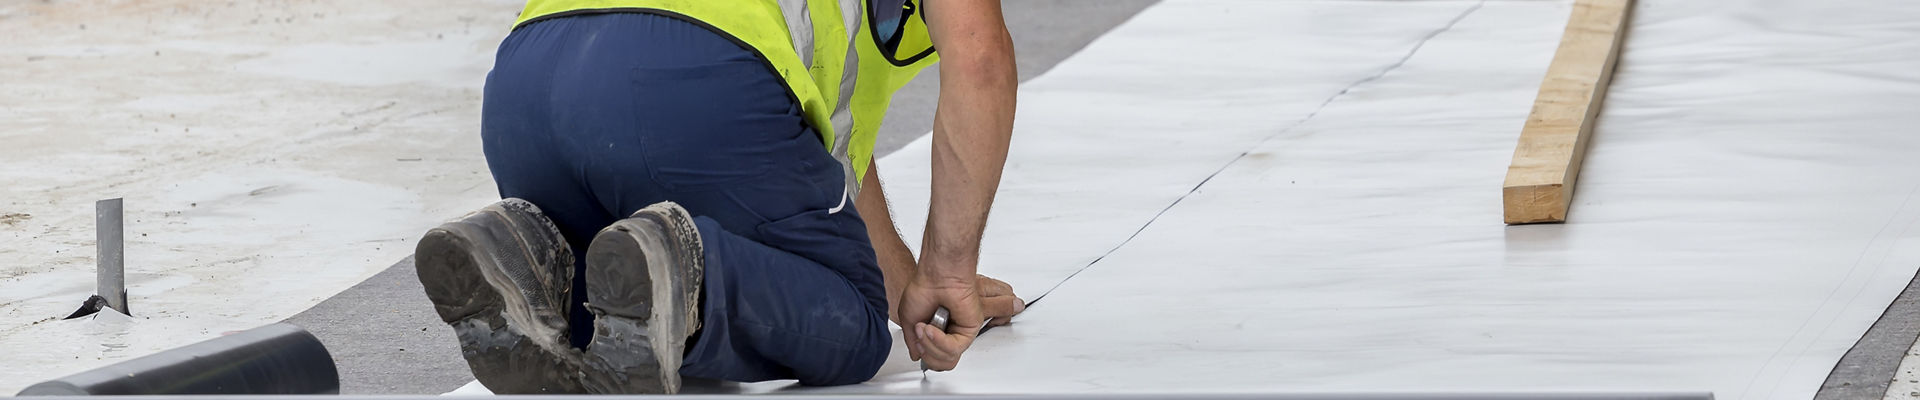 Construction worker installing roofing membrane